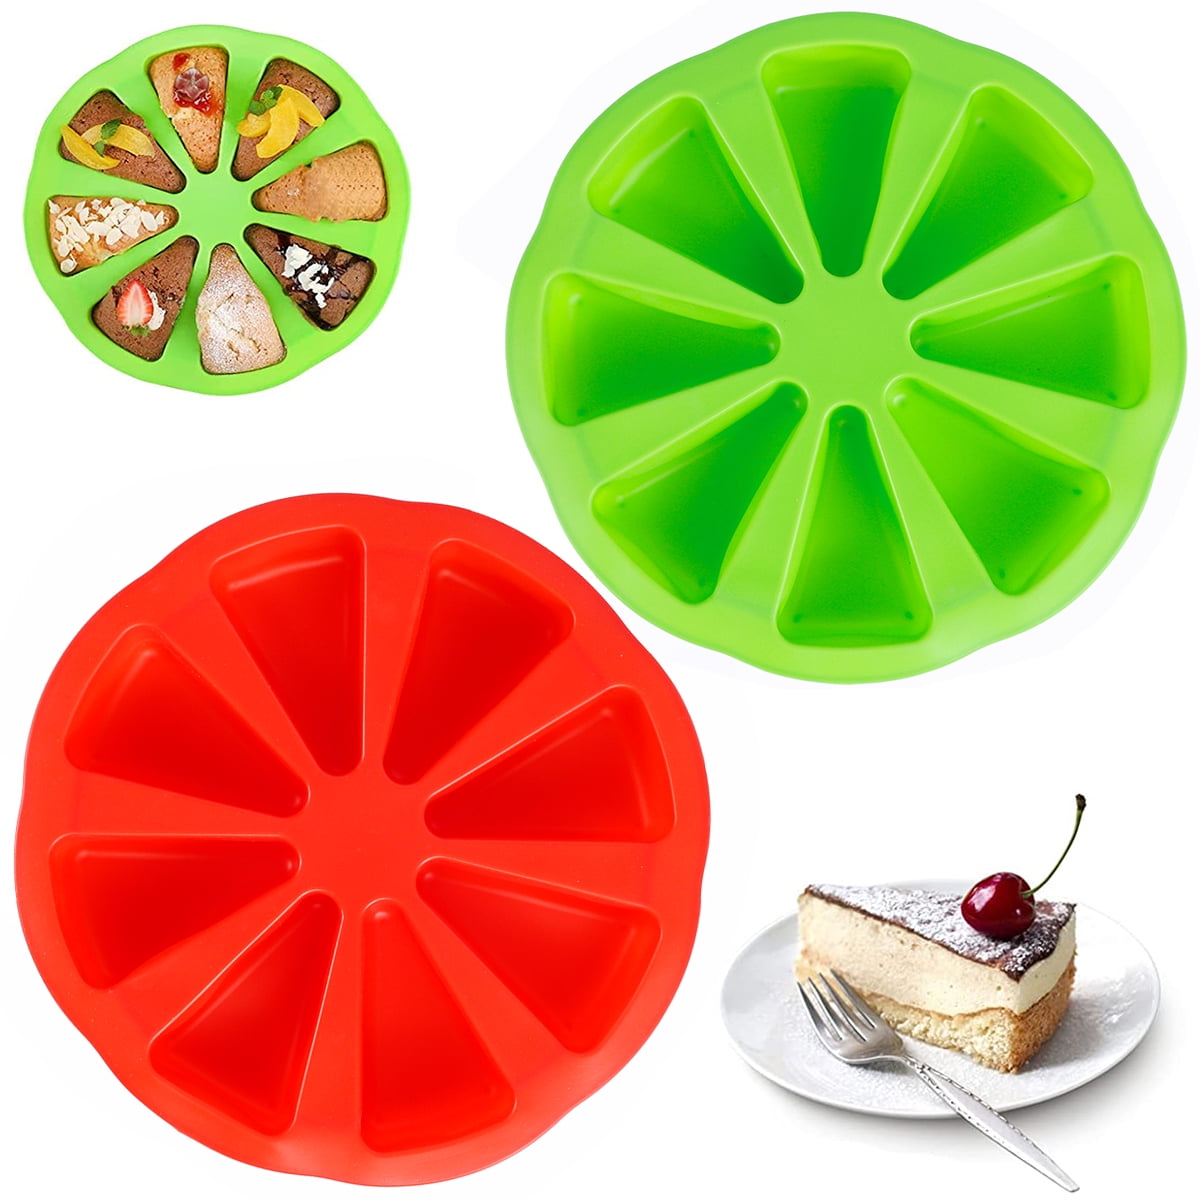 3D Ball Round Half Sphere Silicone Molds for DIY Baking Pudding Mousse  Chocolate Cake Mold Kitchen Accessories Tools